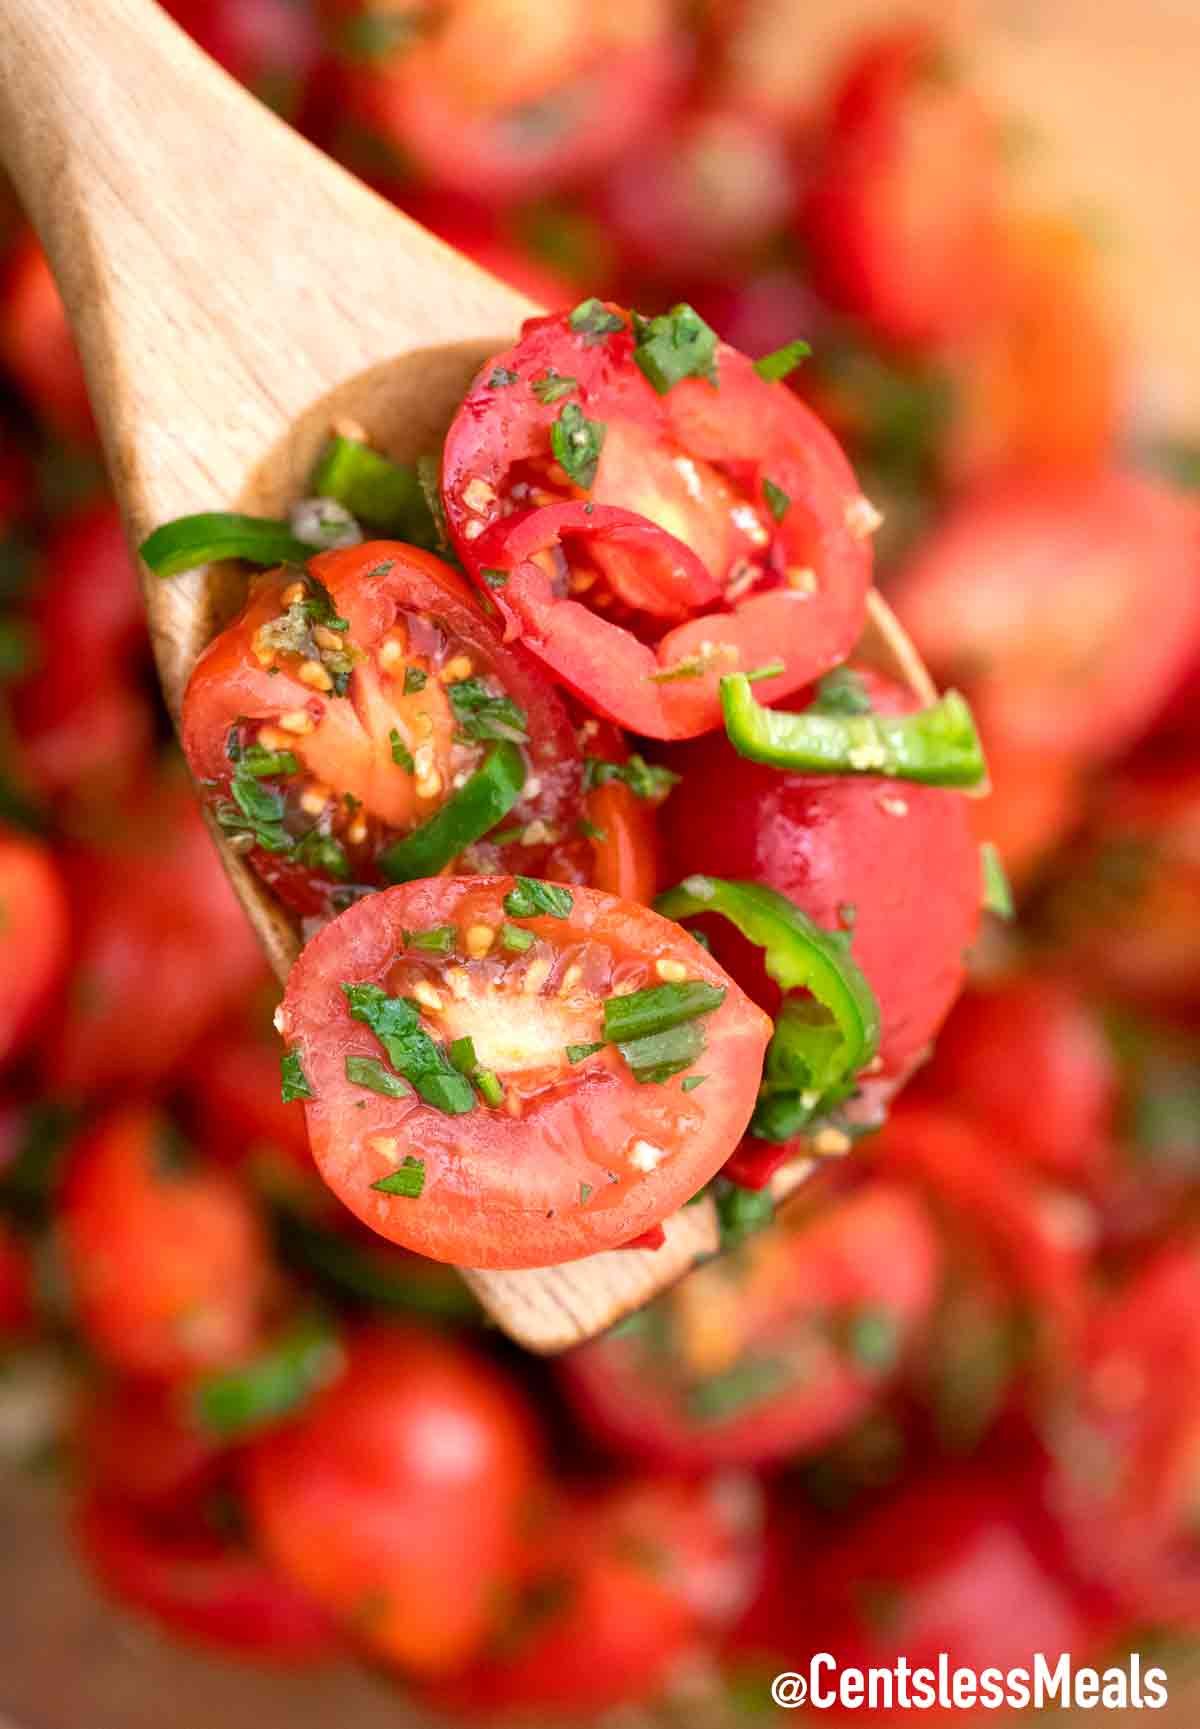 Cherry tomato salad on a wooden spoon.